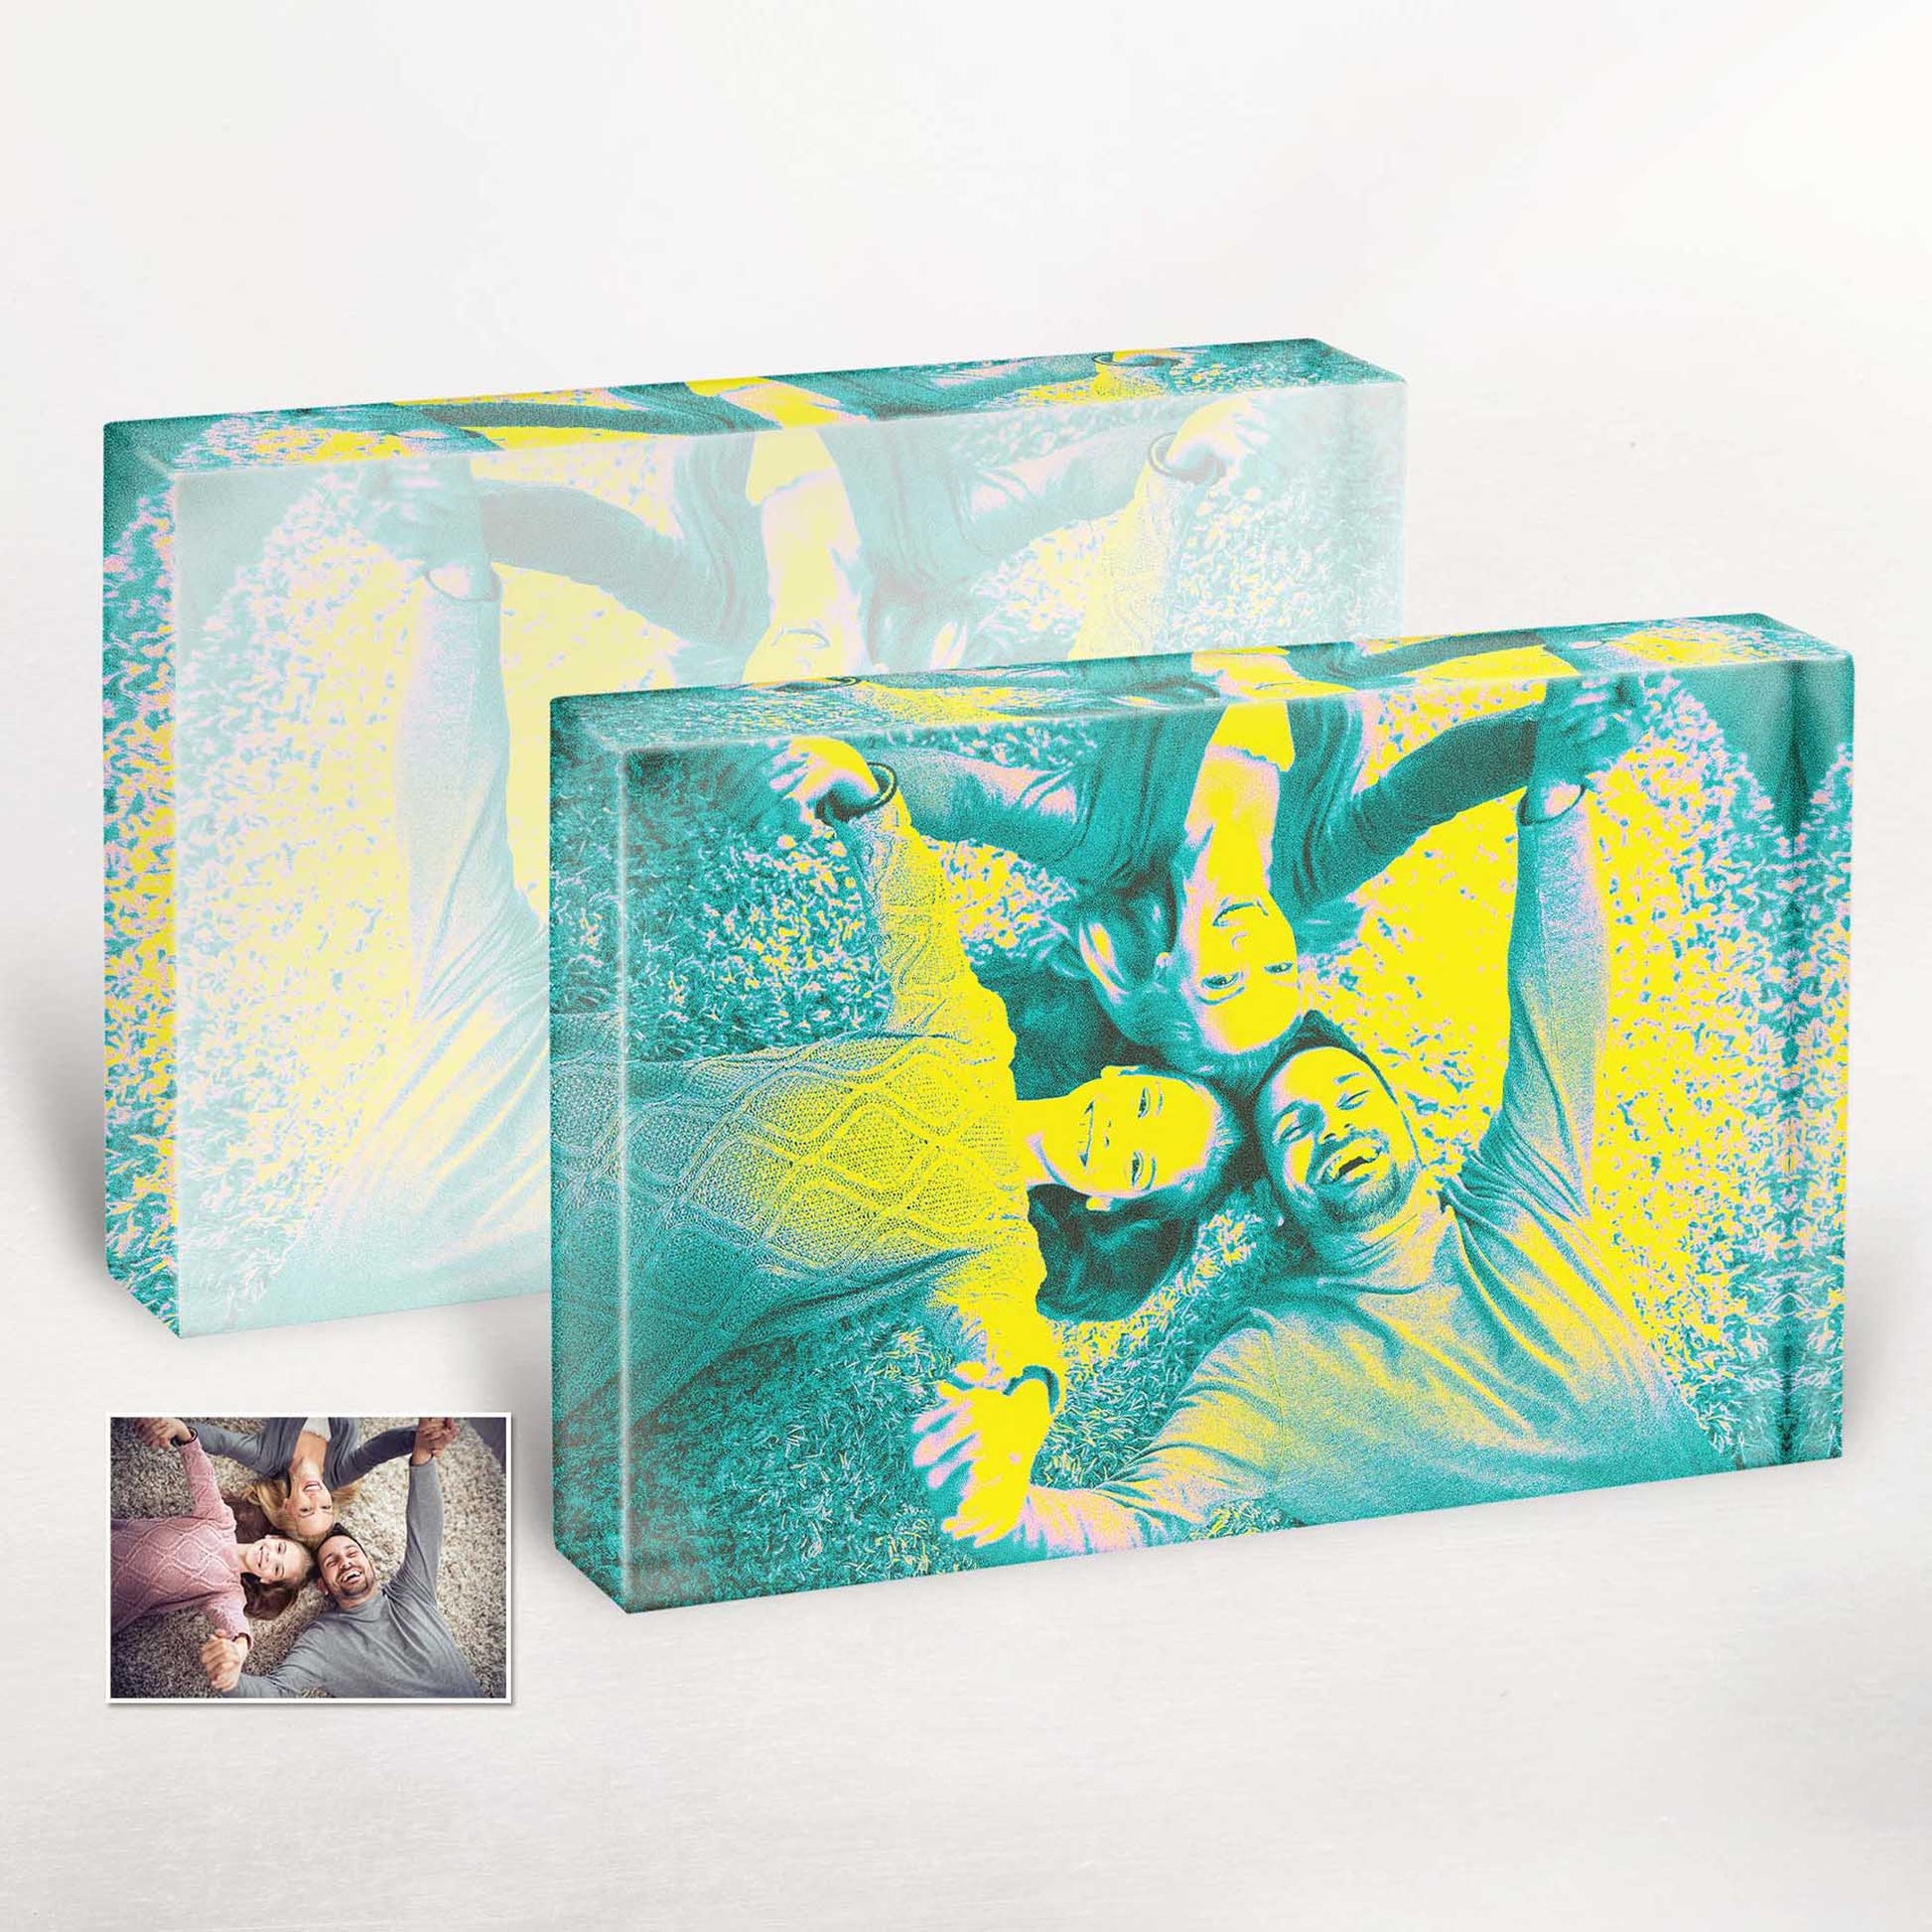 Add a pop of vibrant energy to your space with this Personalised Acid Yellow Color Effect Acrylic Block Photo. The bold and electrifying hue creates a visually striking piece that commands attention and infuses your decor with a modern edge